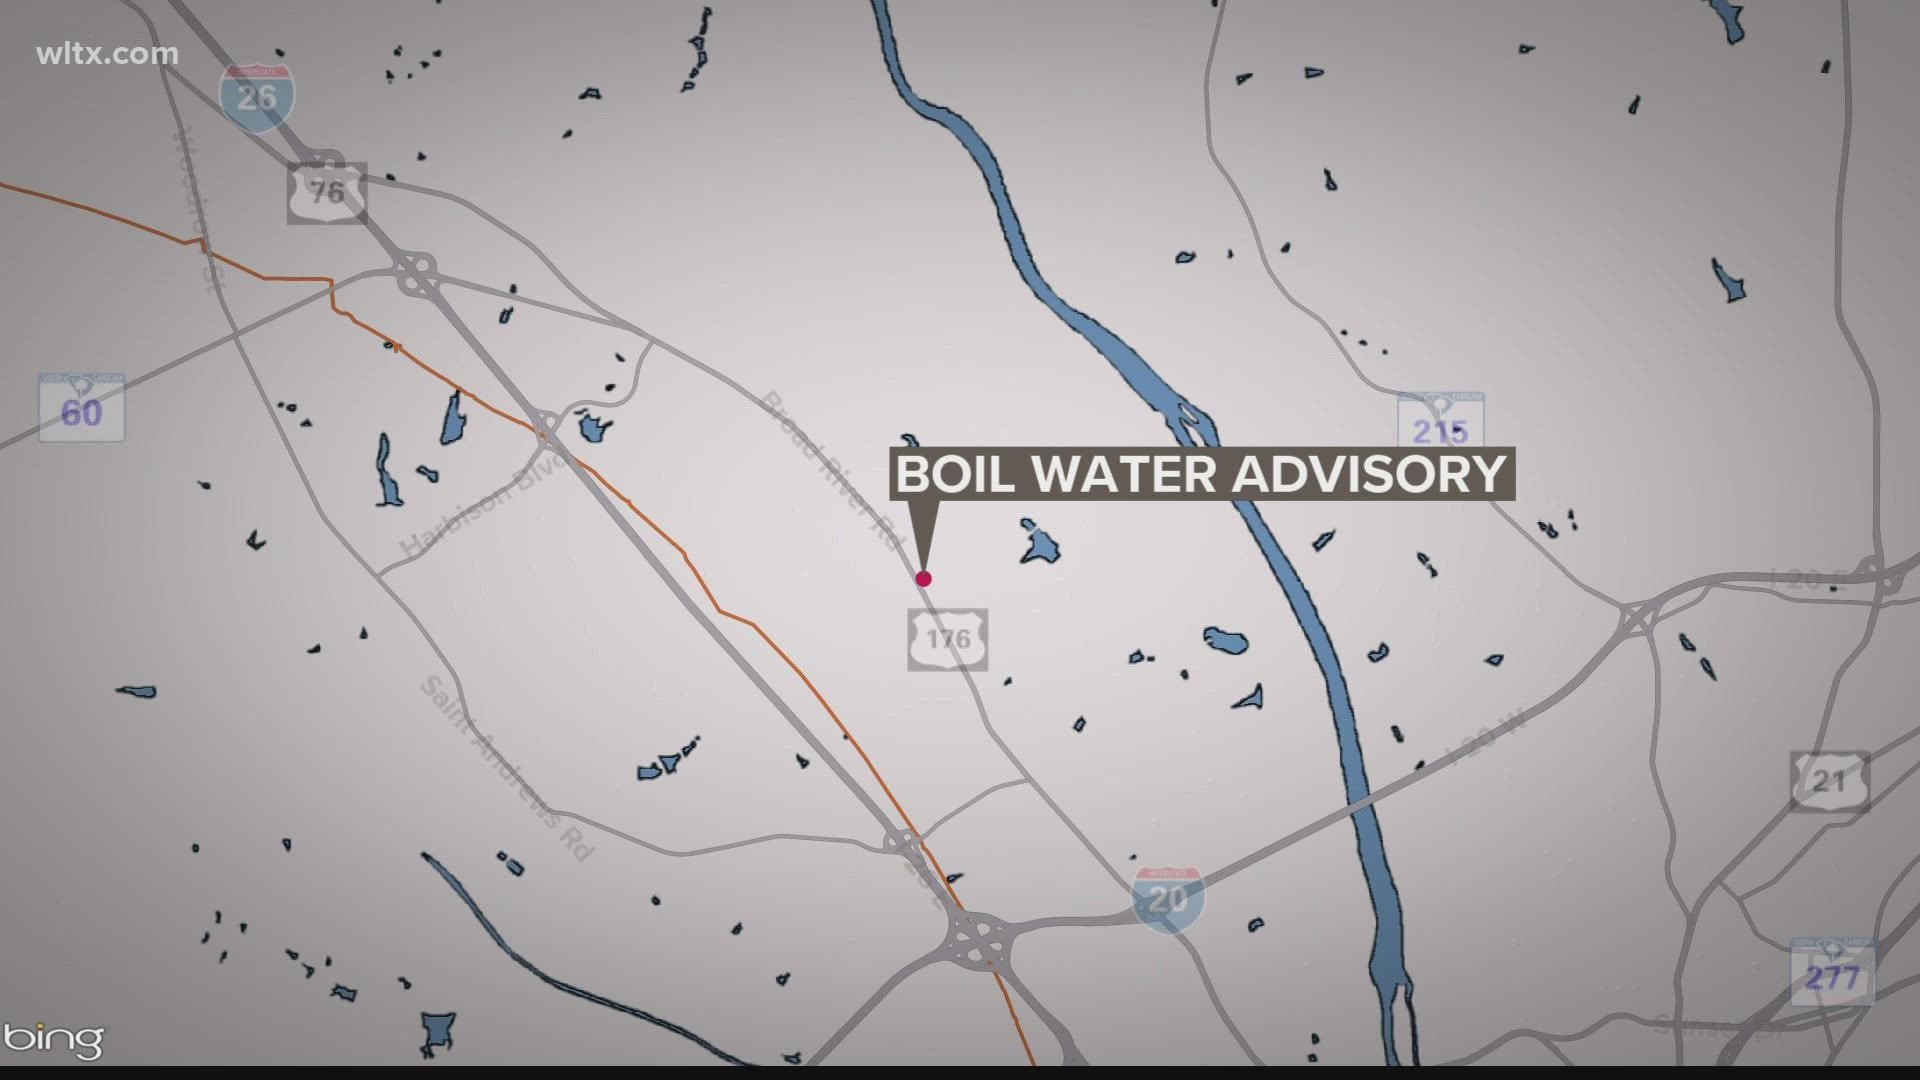 Columbia Water has issues a boil water advisory for the 4400 block of Broad River road in Richland county.